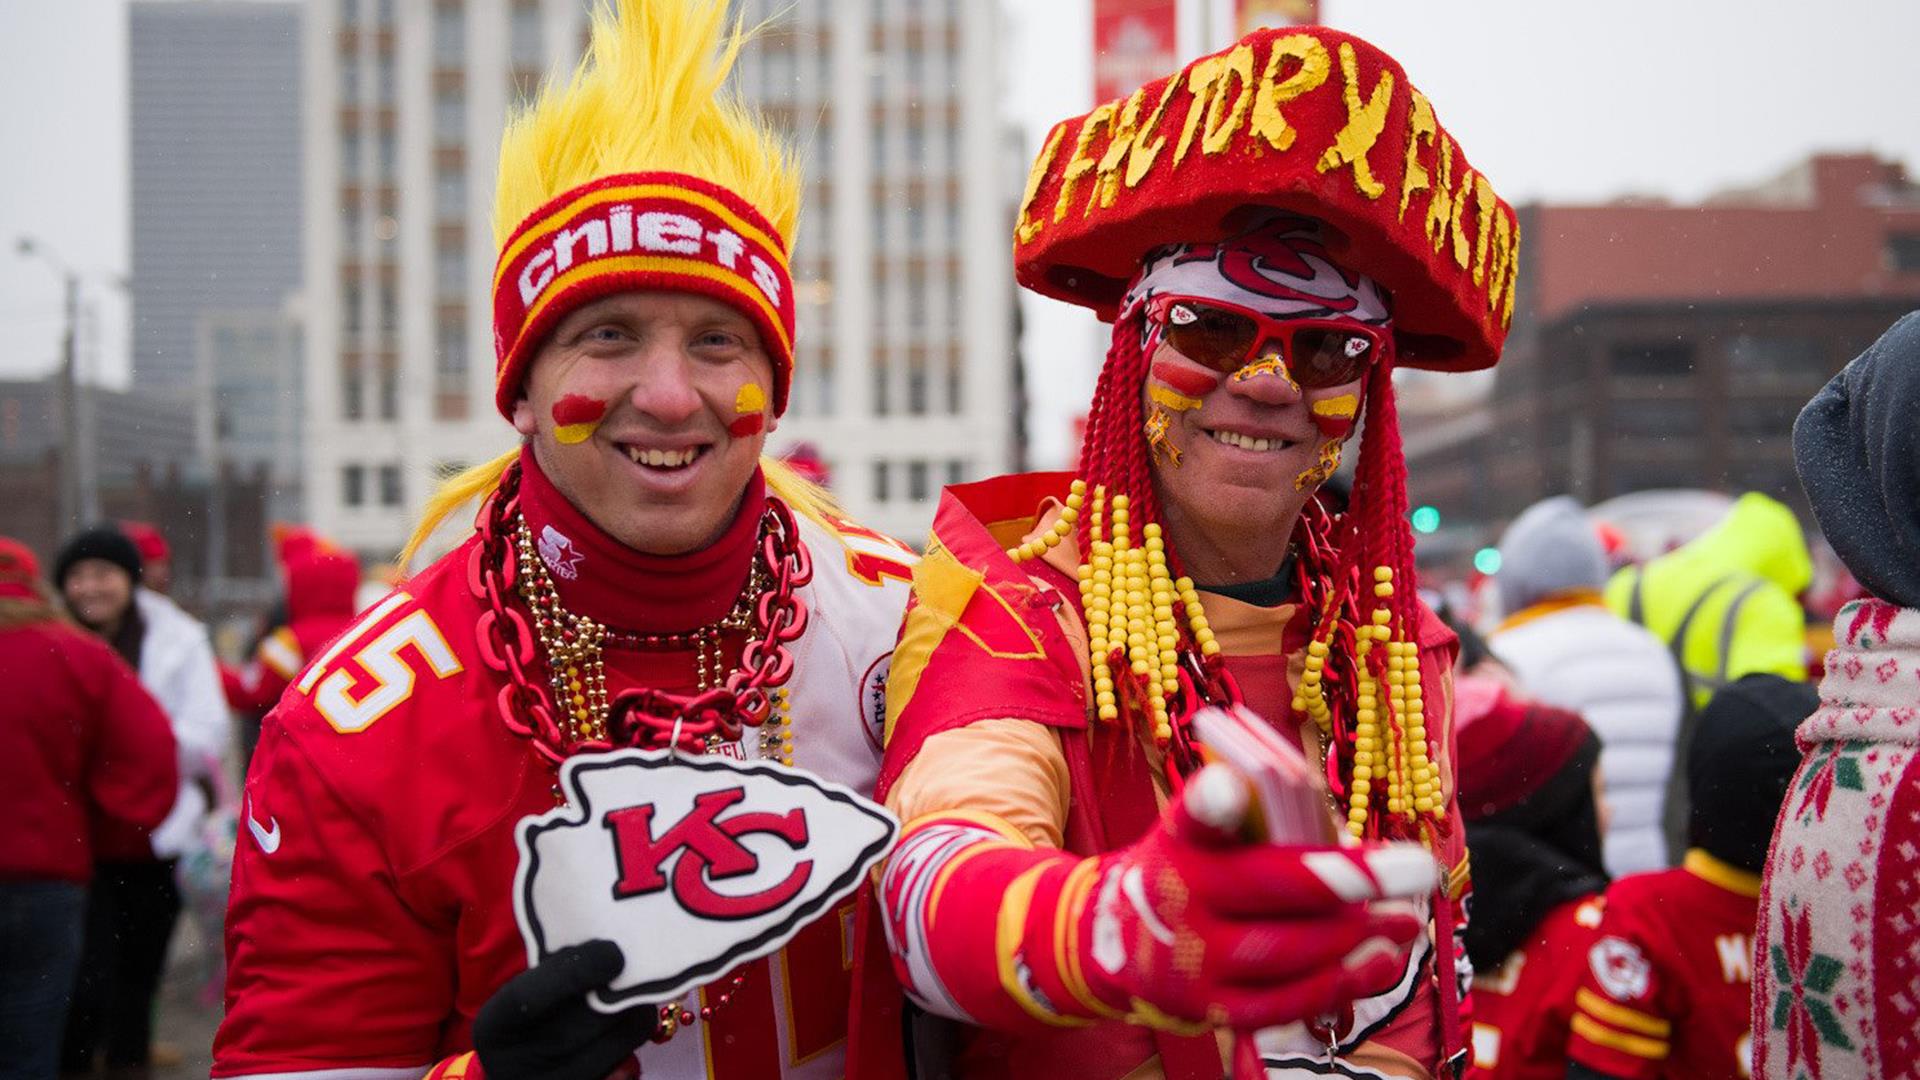 Kansas City unlikely to host second parade if Chiefs win Super Bowl